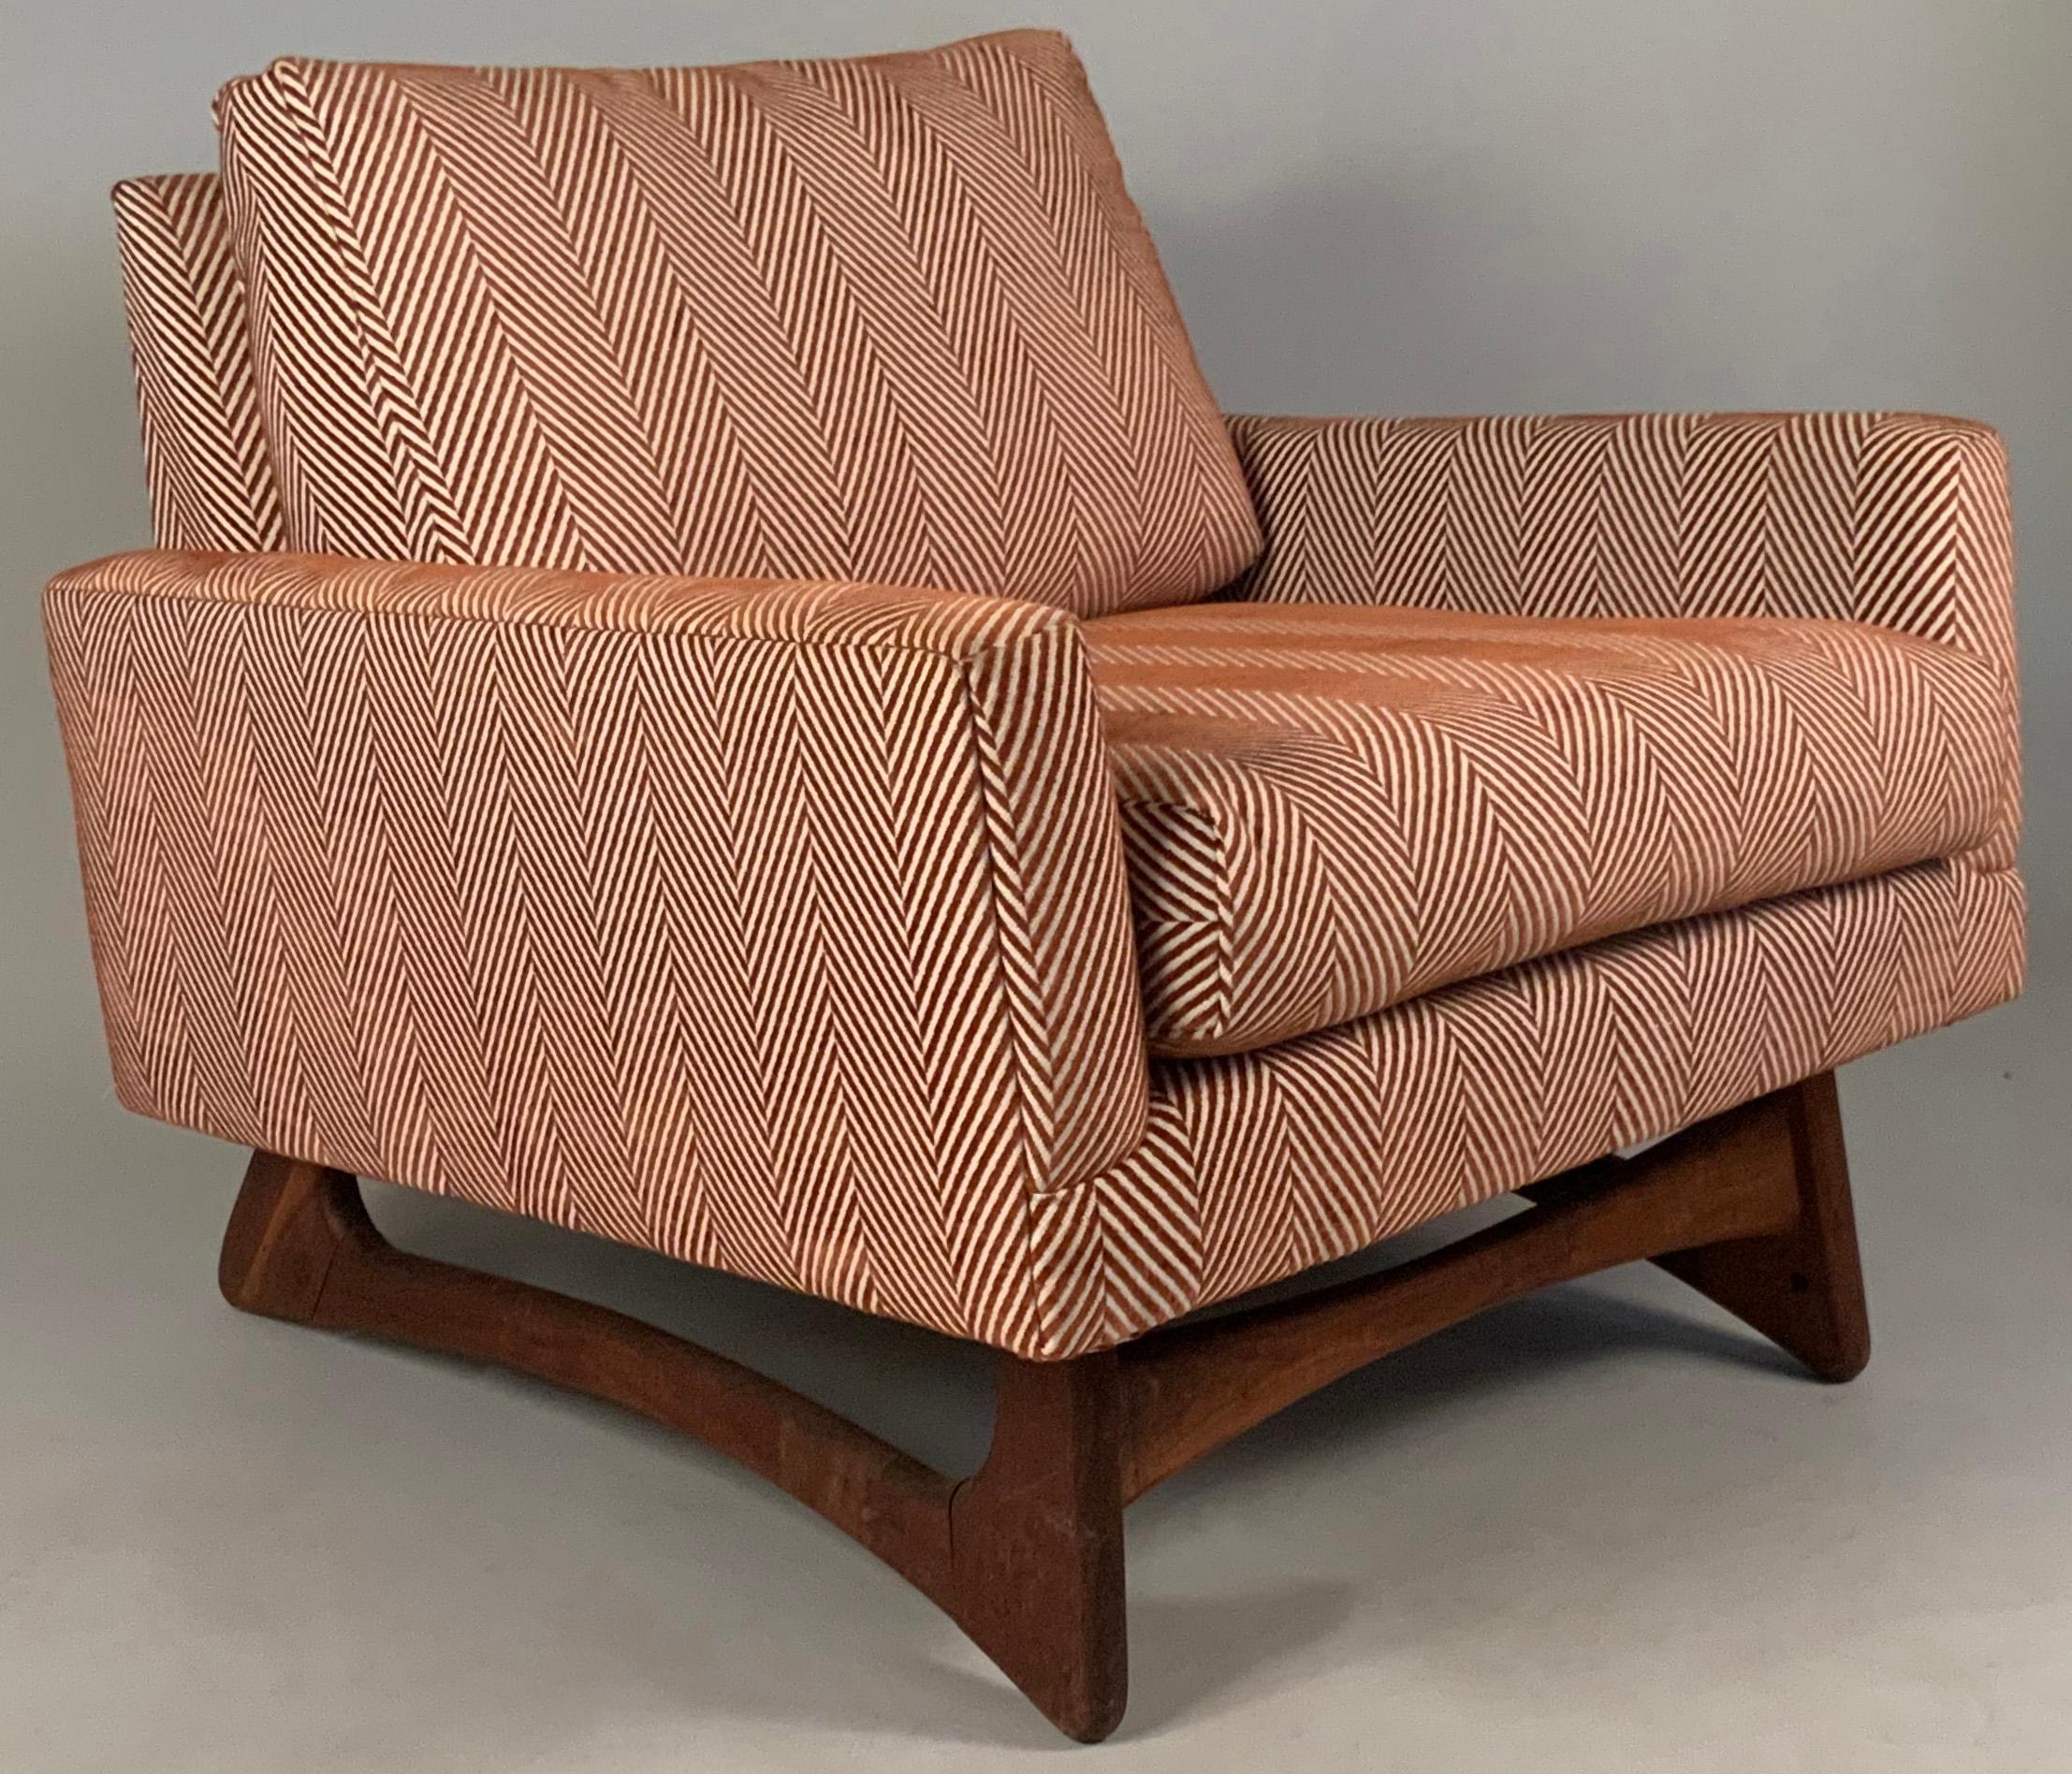 a very handsome pair of vintage 1950's lounge chairs designed by Adrian Pearsall for Craft Associates. these very comfortable chairs have sculpted walnut bases in Pearsall's signature design, and have just been reupholstered in a very nice red and